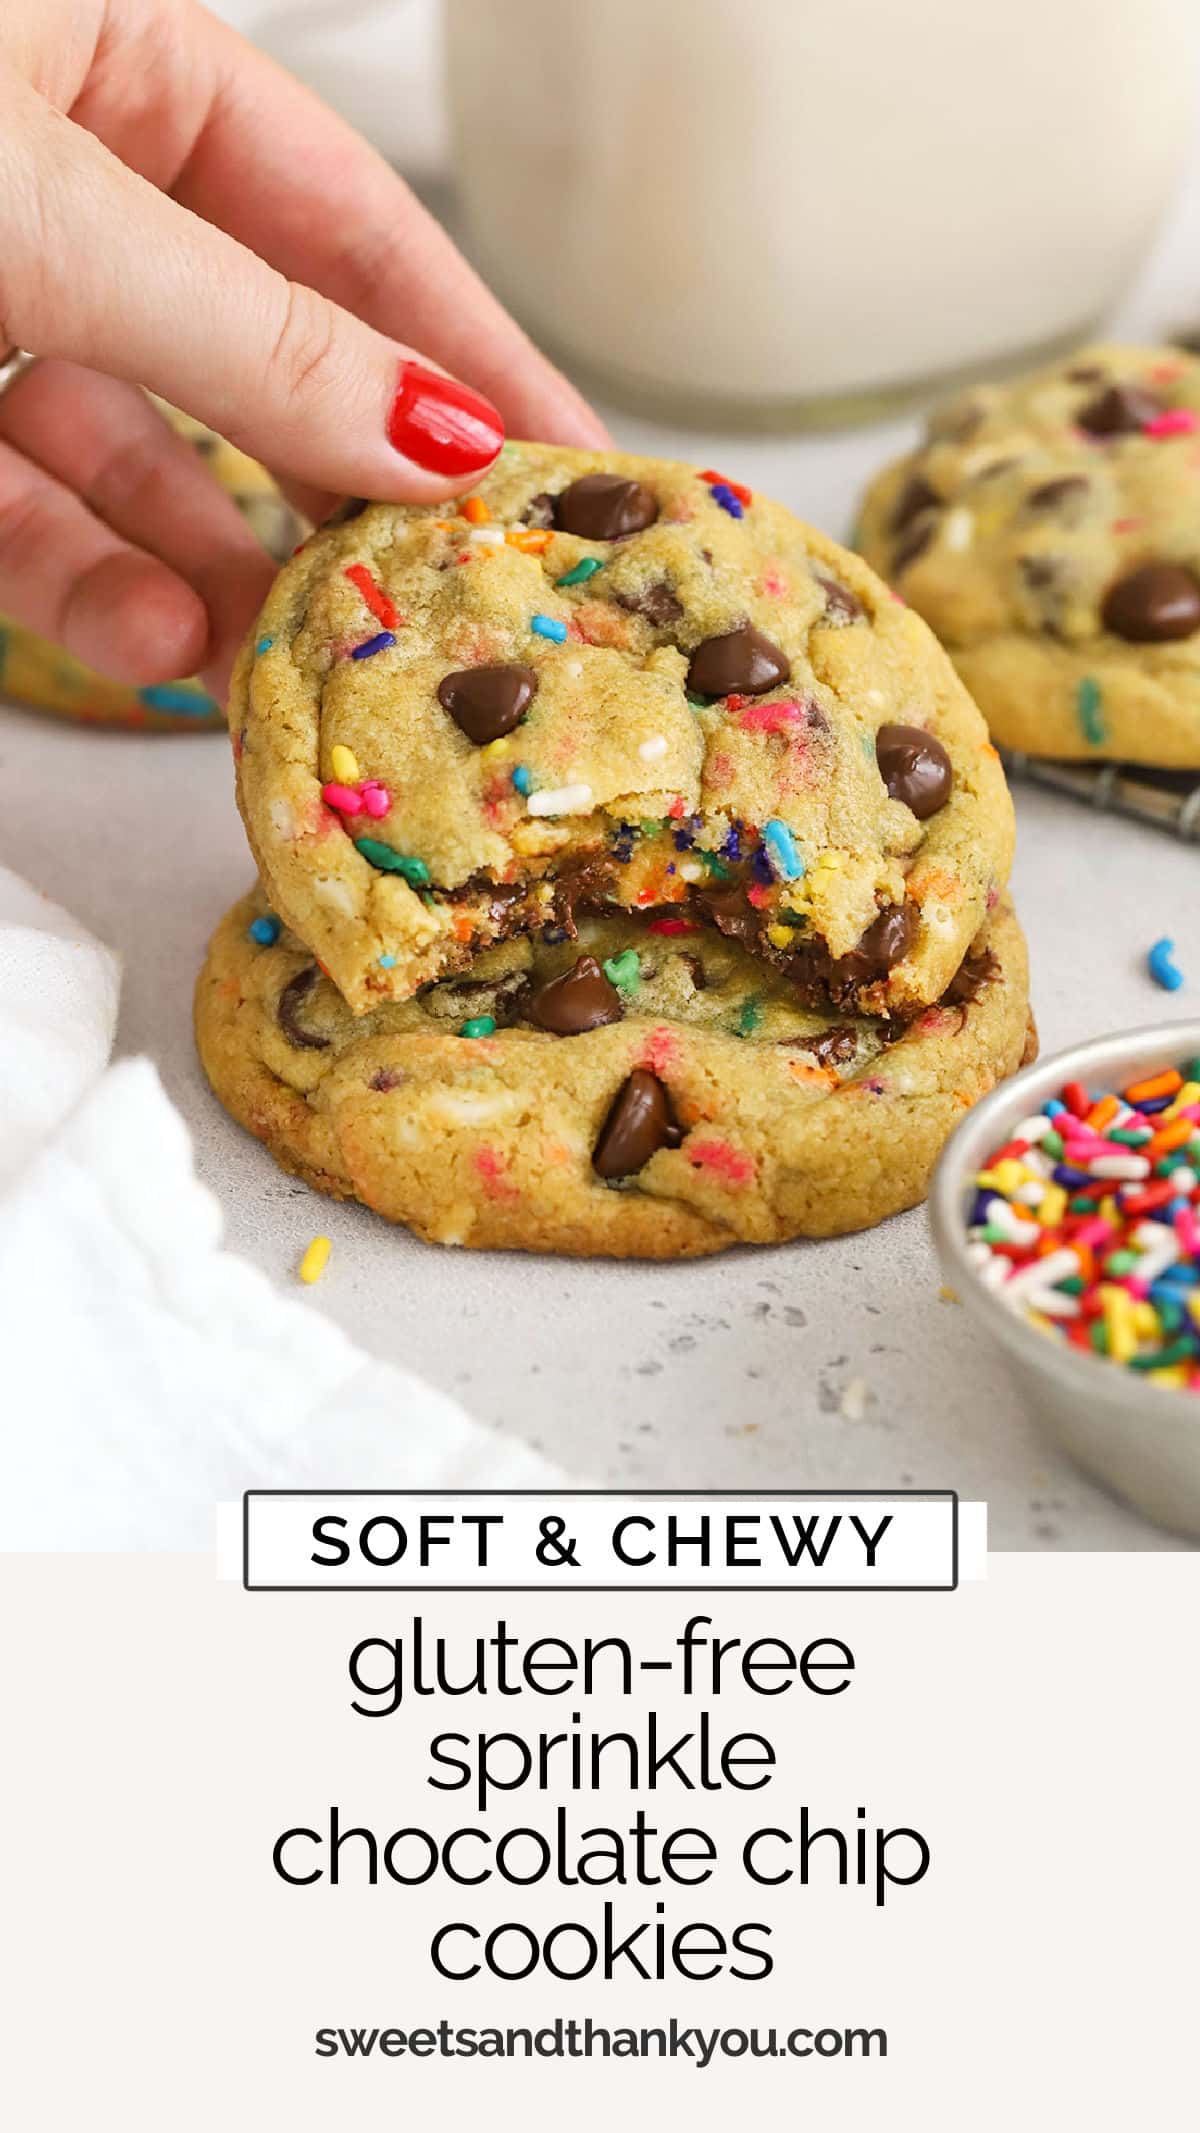 These gluten-free sprinkle chocolate chip cookies are SO MUCH FUN to make and eat! These classic gluten-free chocolate chip cookies with sprinkles add a fun touch to any celebration! / gluten-free birthday cake chocolate chip cookies recipe / gluten-free funfetti chocolate chip cookies recipe / gluten-free chocolate chip cookies recipe / gluten-free cookies with sprinkles / 